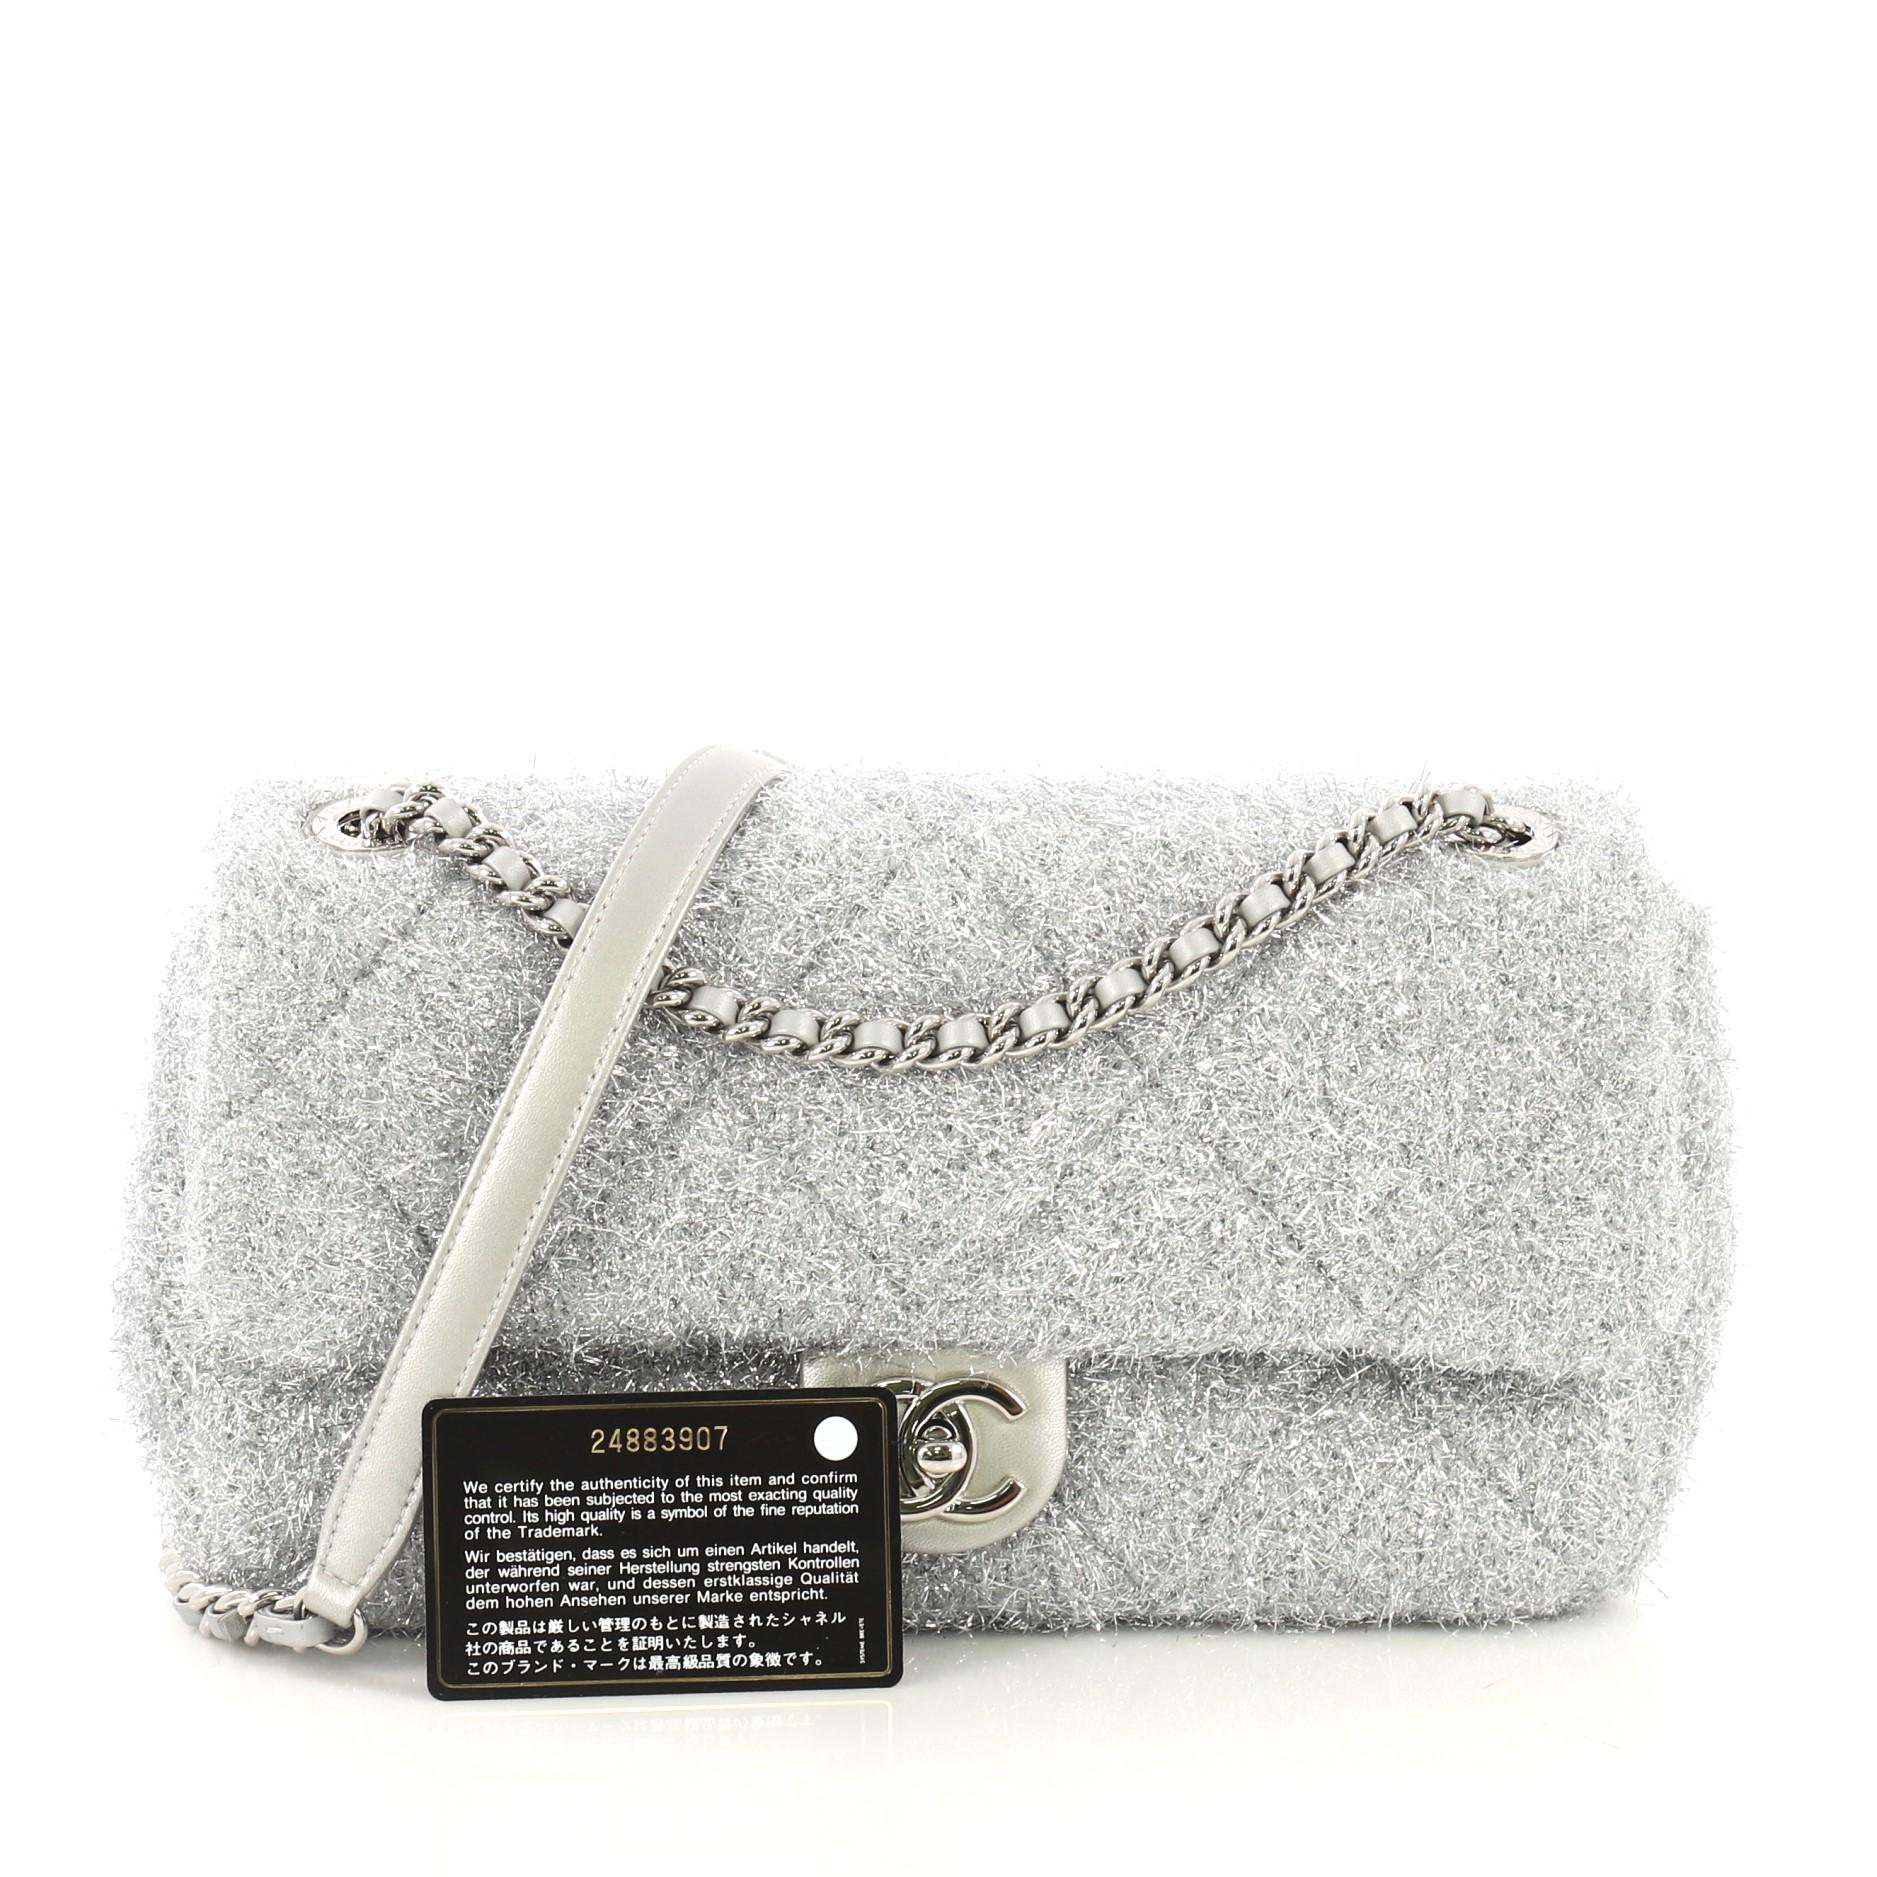 This Chanel CC Chain Flap Bag Quilted Knit Pluto Glitter Medium, crafted in silver quilted knit pluto glitter, features woven-in knit chain strap, and silver-tone hardware accents. Its CC turn-lock closure opens to a light blue satin interior with